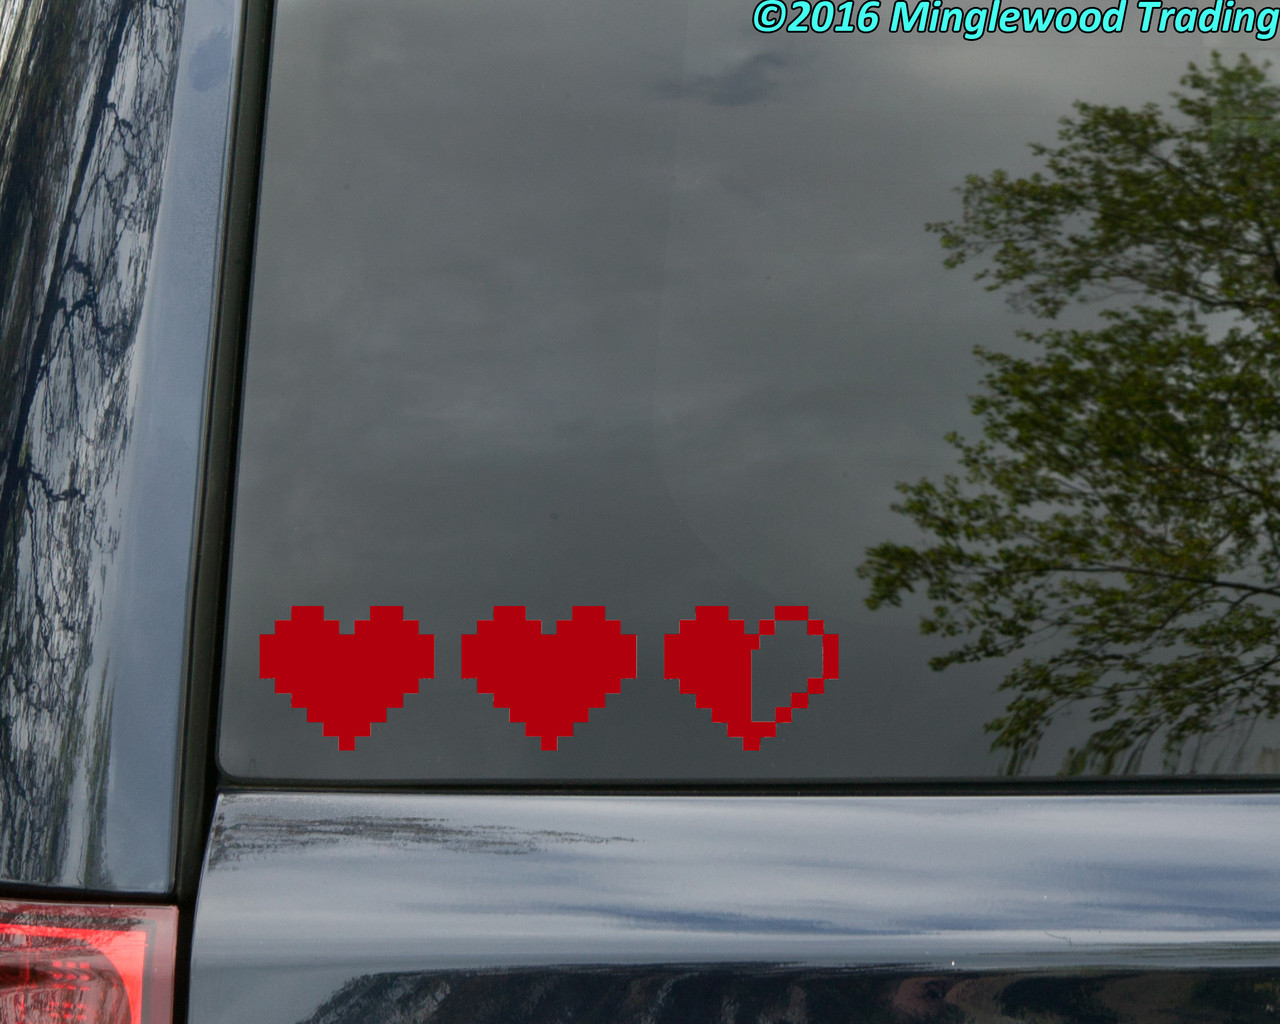 2 Sets Small Heart Pixelated Pixel Decal Car Window Glass Tiny 